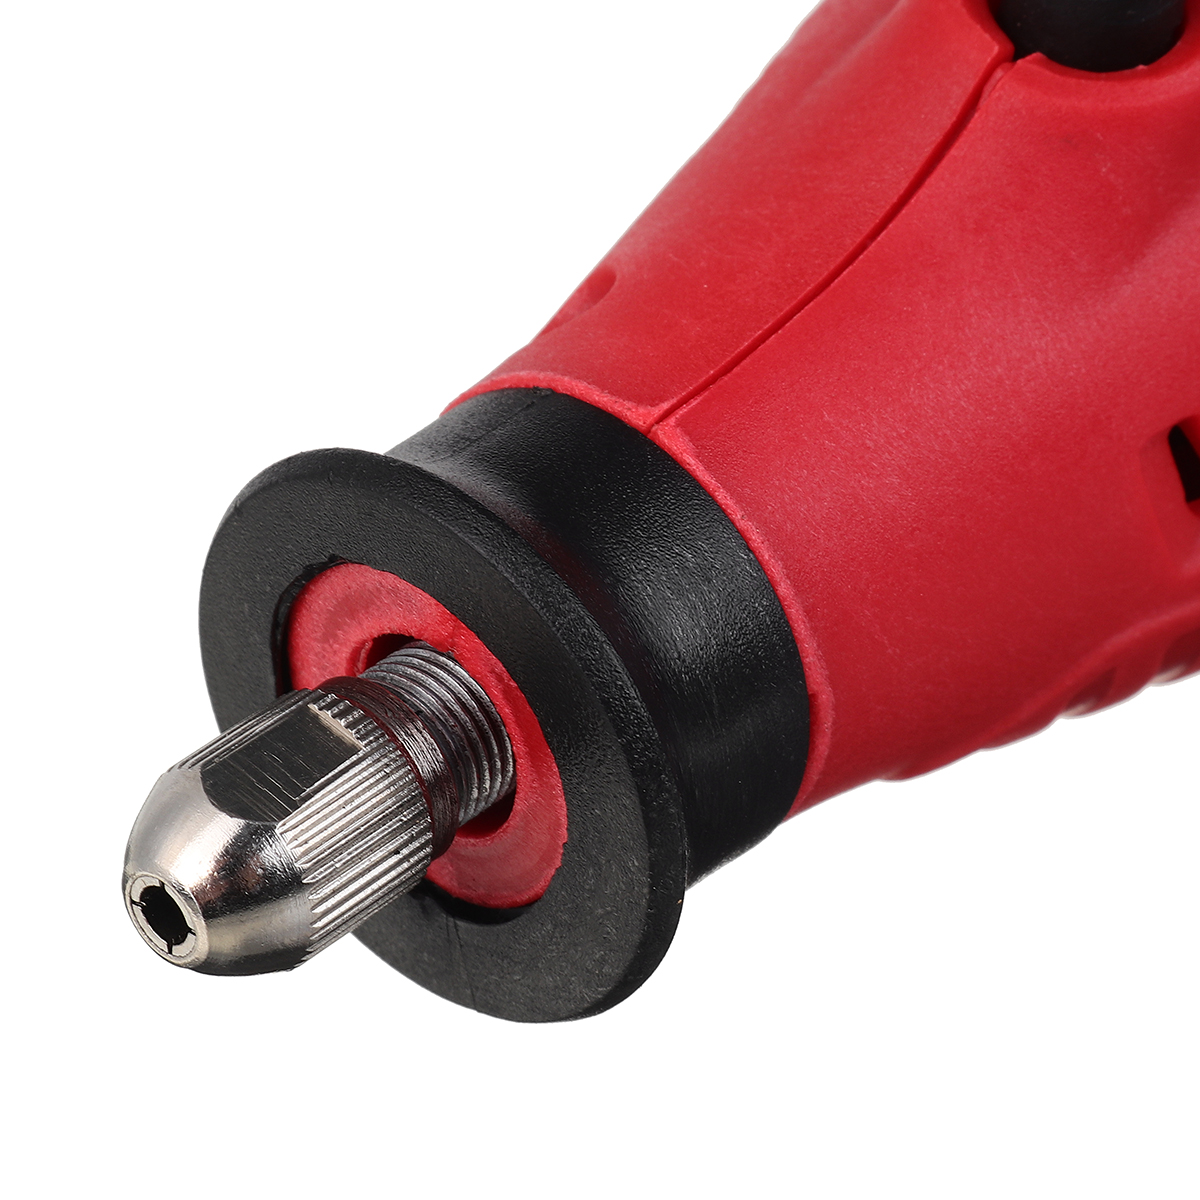 Chain-Saw-Sharpener-Guide-Electric-Grinder-Mini-Cordless-Chainsaw-Sharp-Grinding-Polishing-Tool-1852933-7